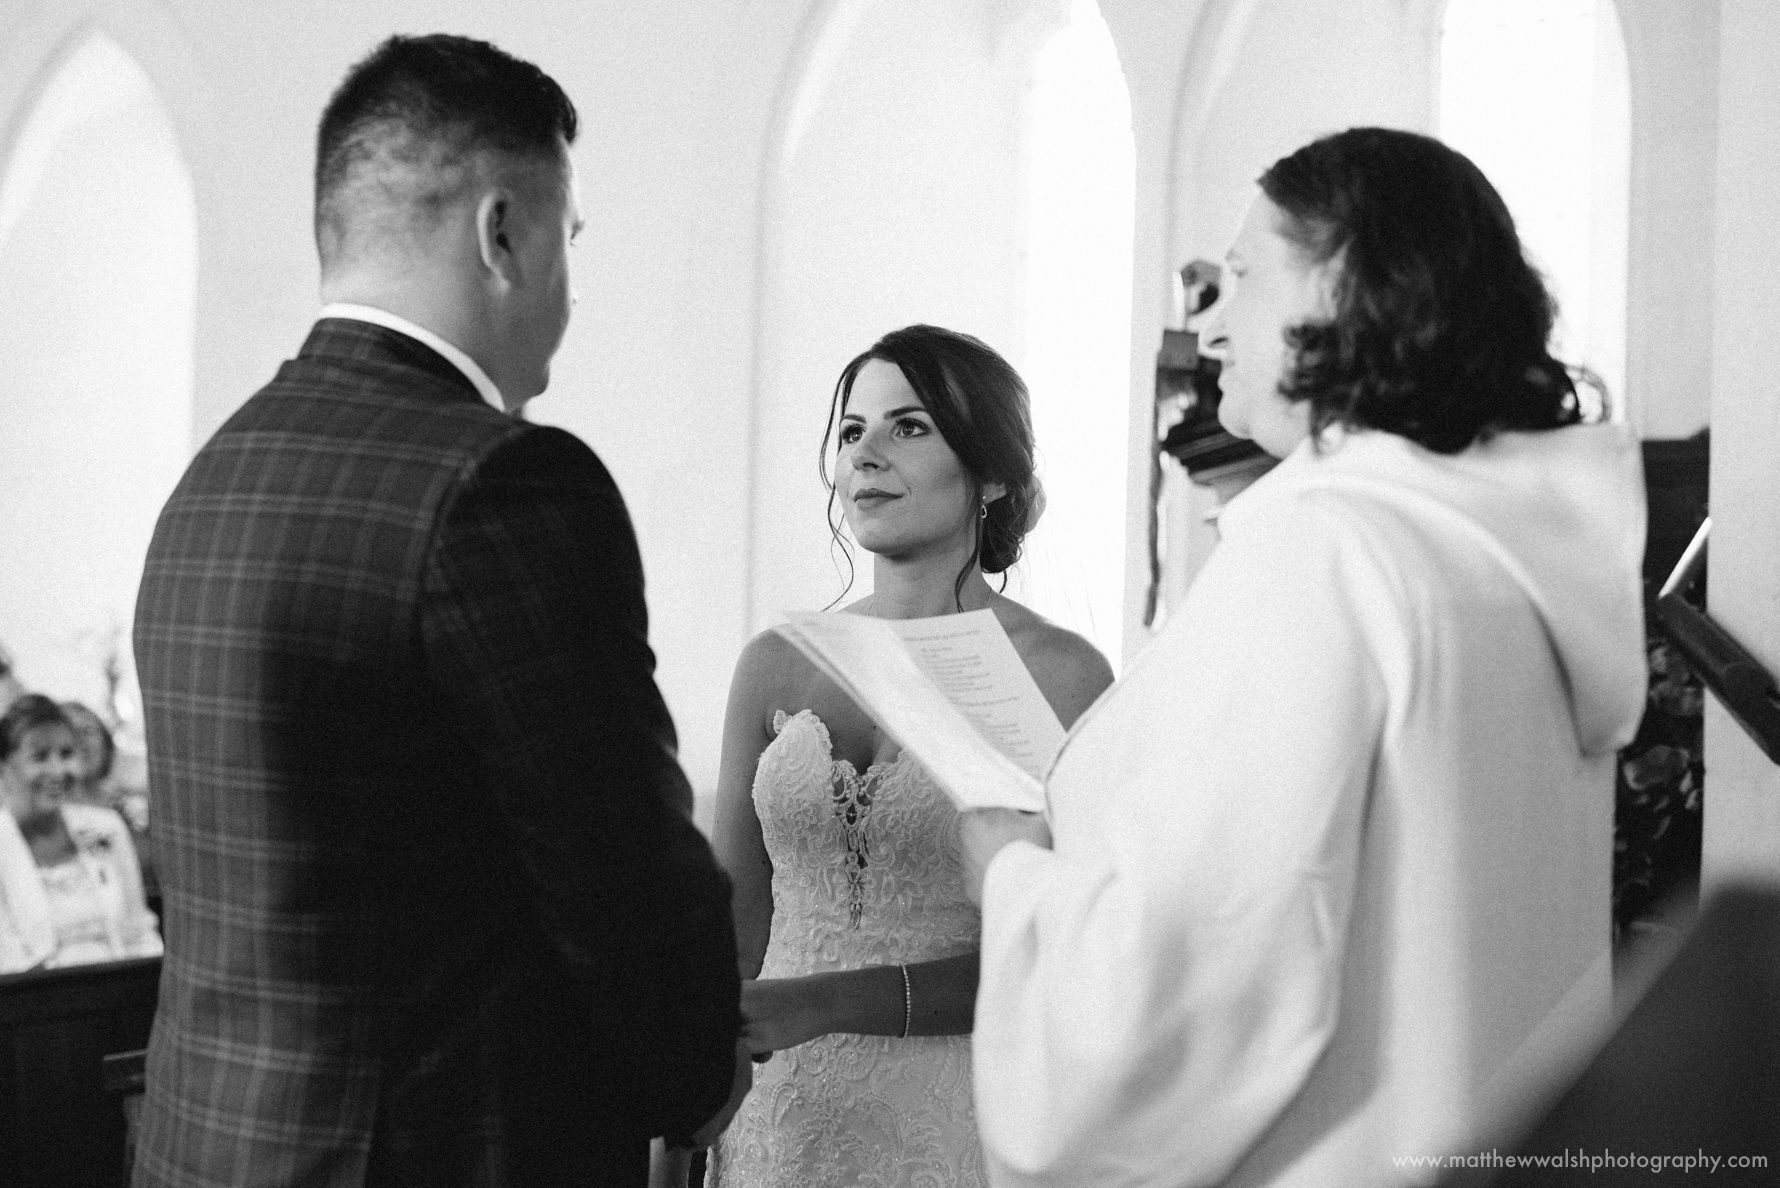 Bride and groom make their wedding vows